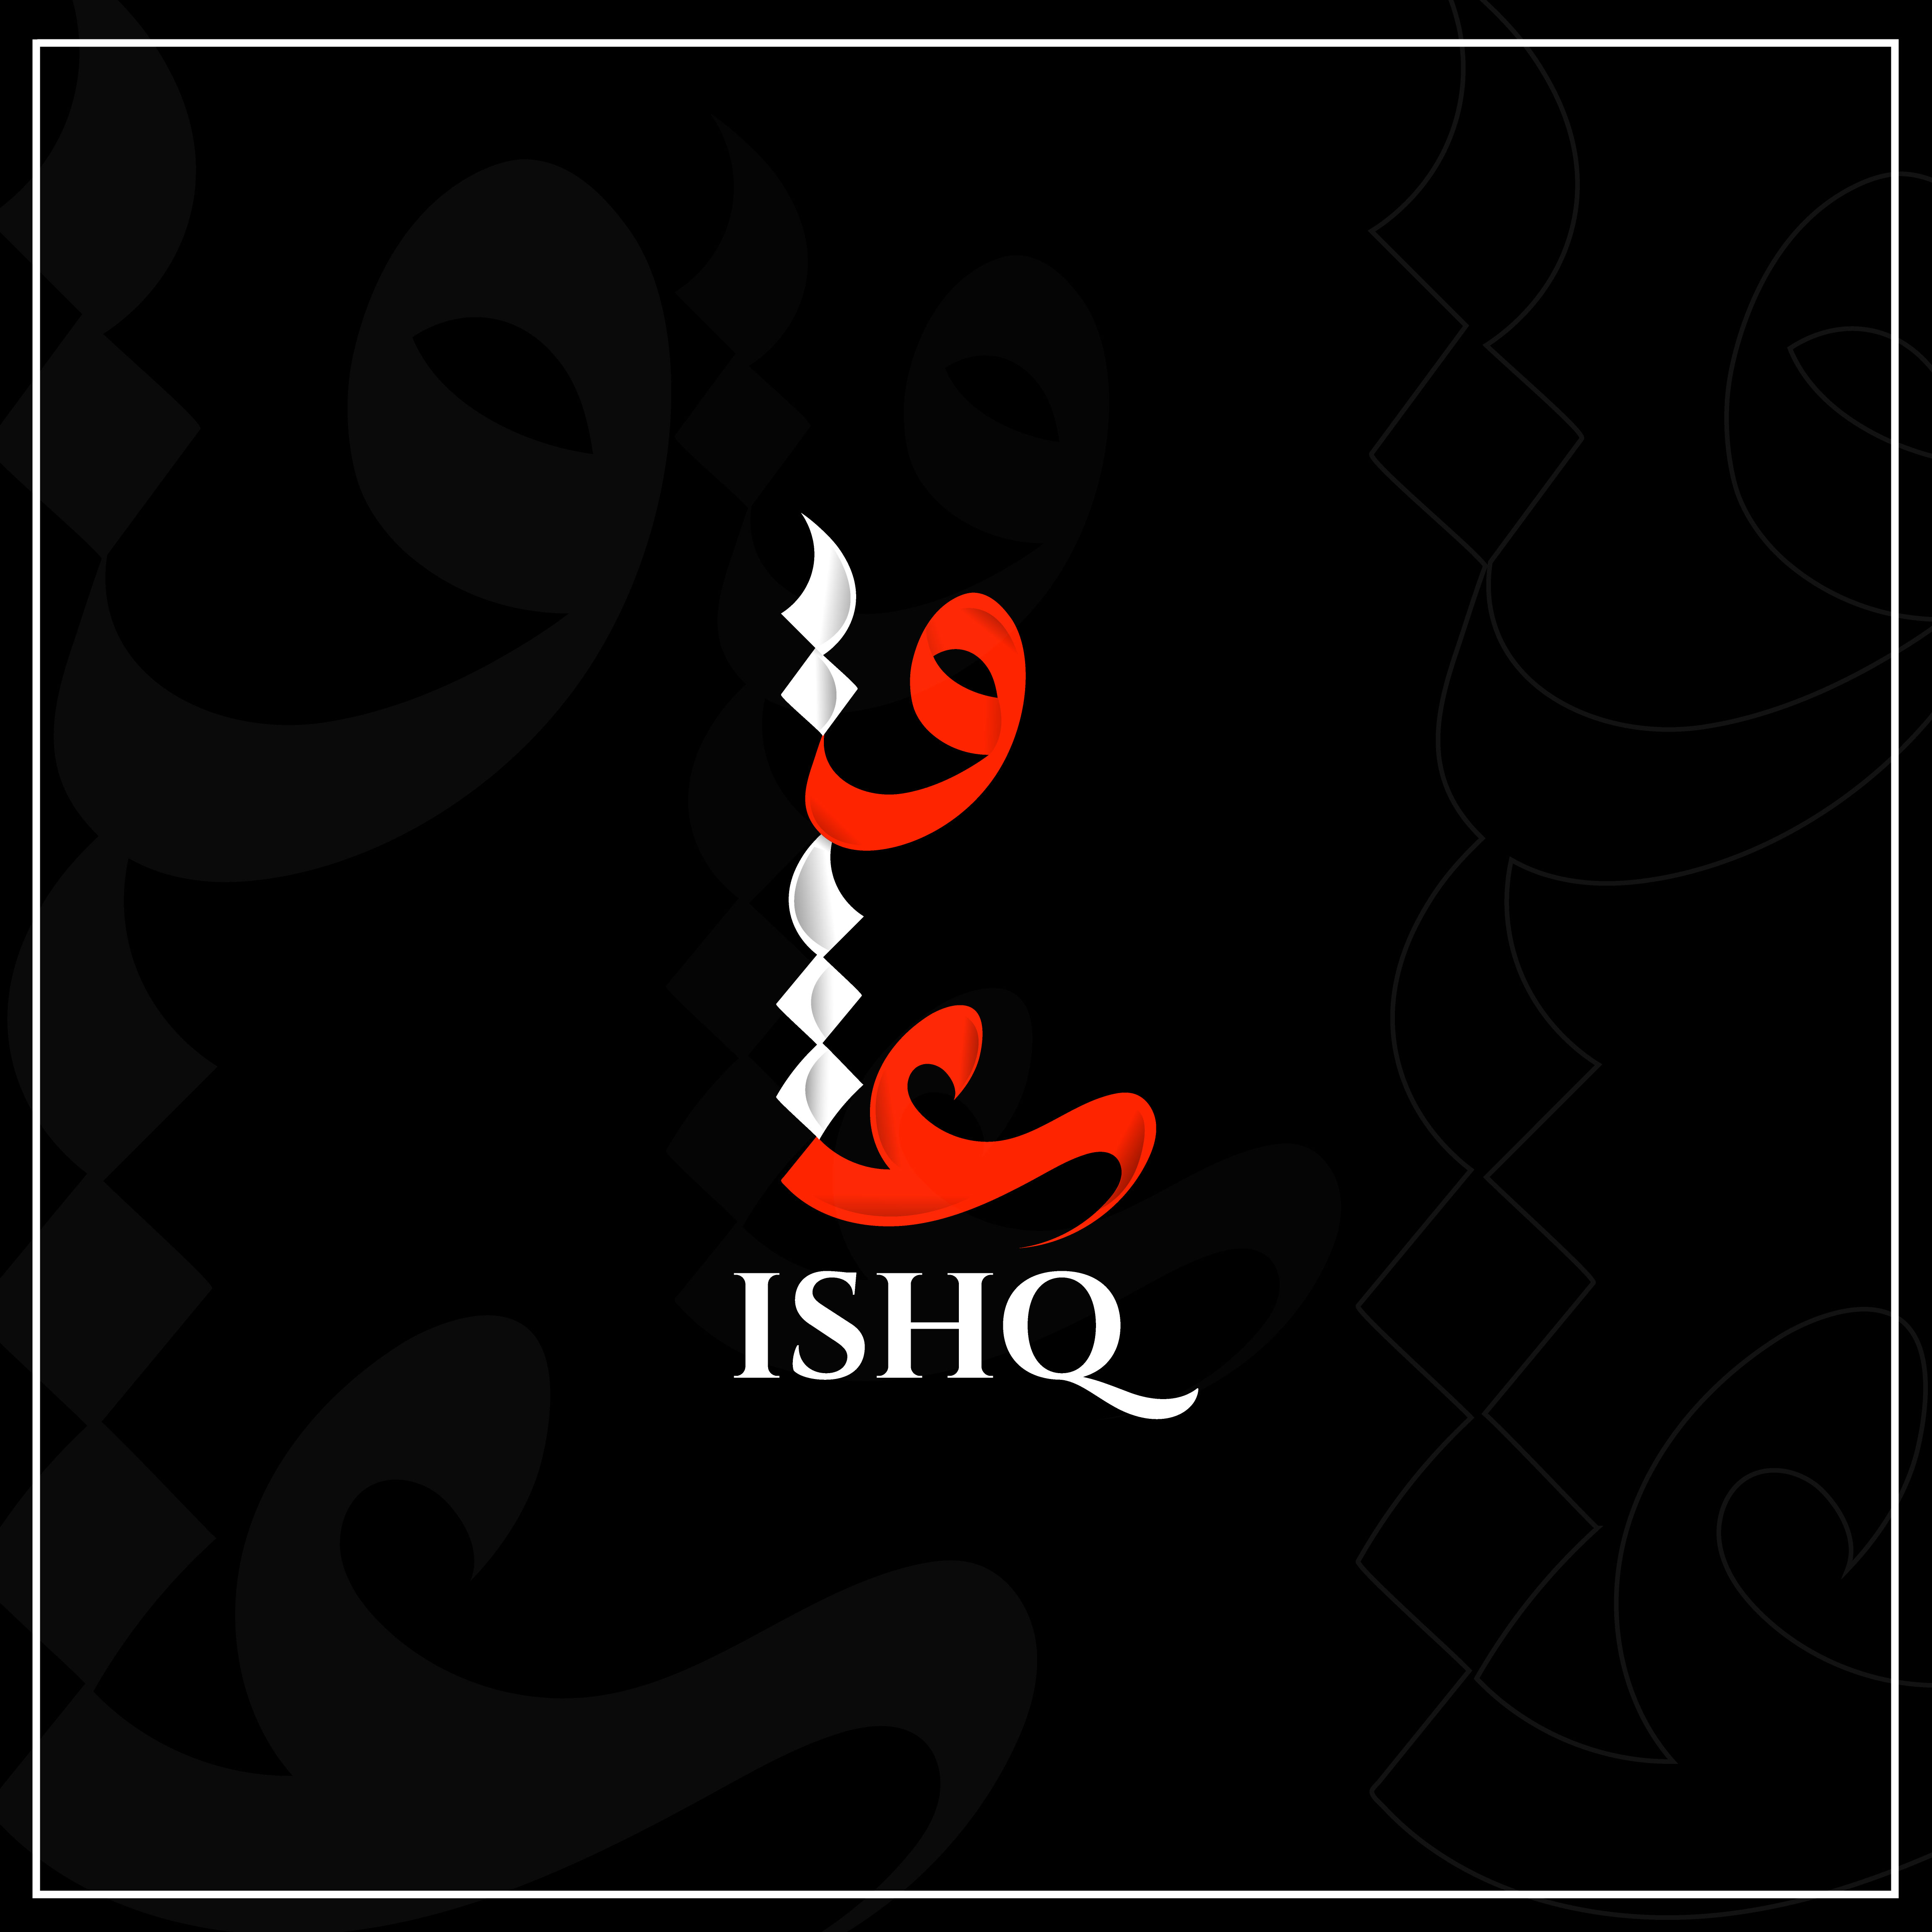 LOVE (ISHQ) Arabic Calligraphy preview image.